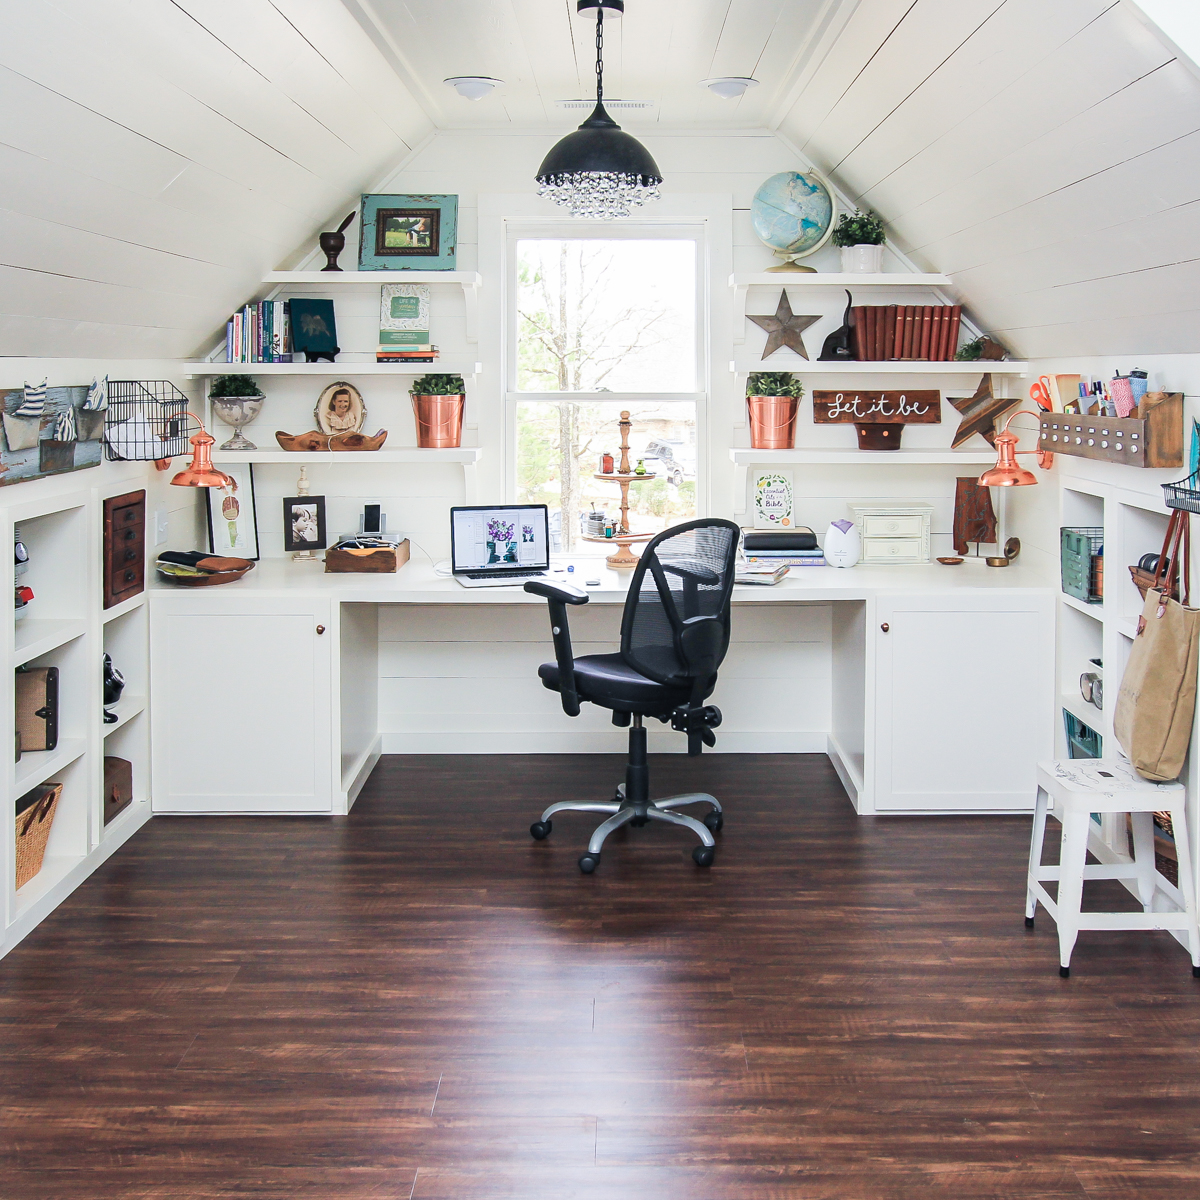 Shabby-chic attic work space with shelves